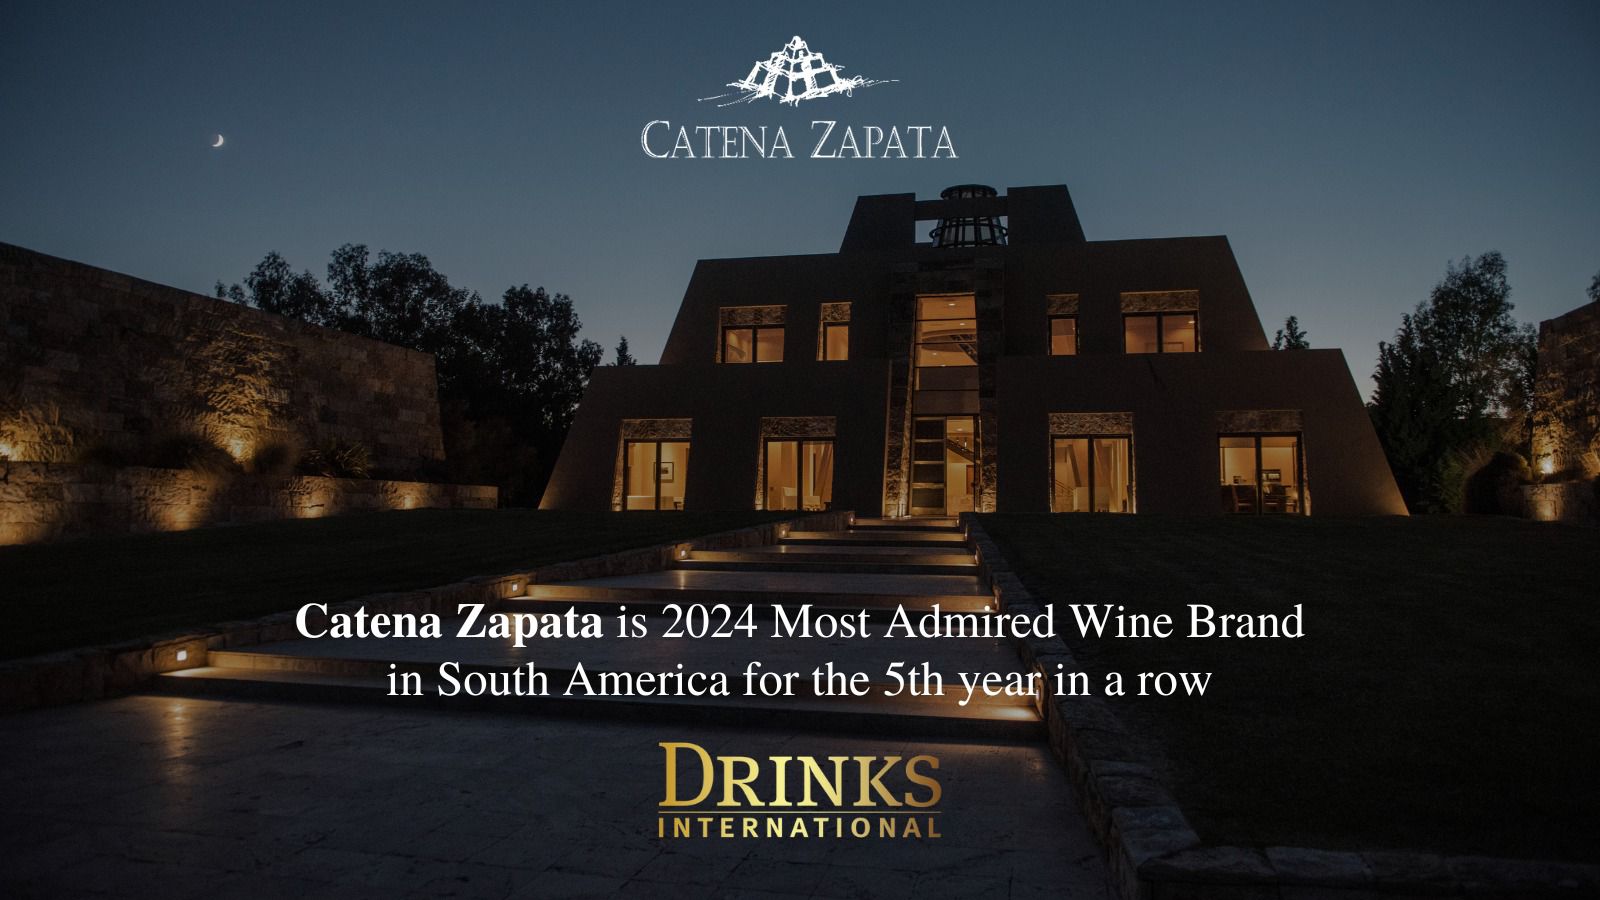 The 2nd World’s Most Admired Wine Brand 2024 is from Mendoza